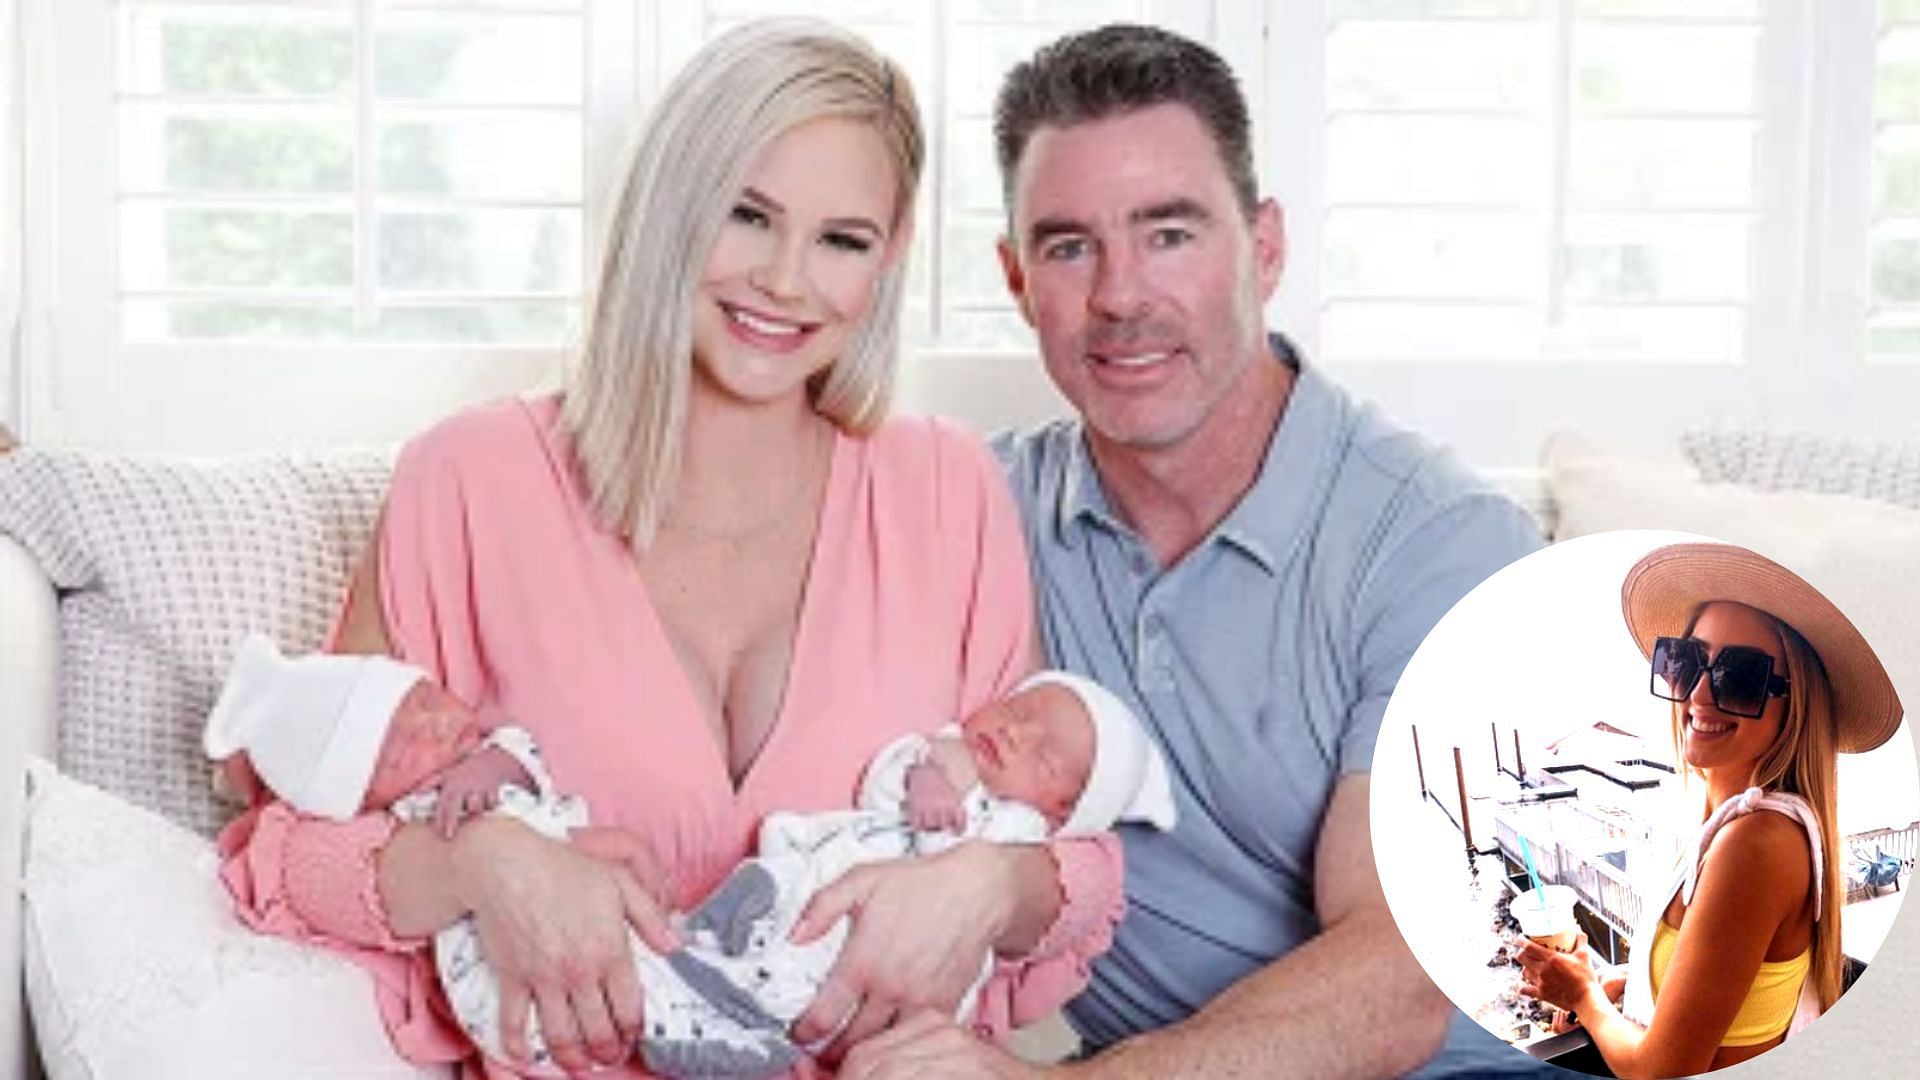 Jim Edmonds Says Ex-Wife Meghan King's Been Telling Lies For 3 Years